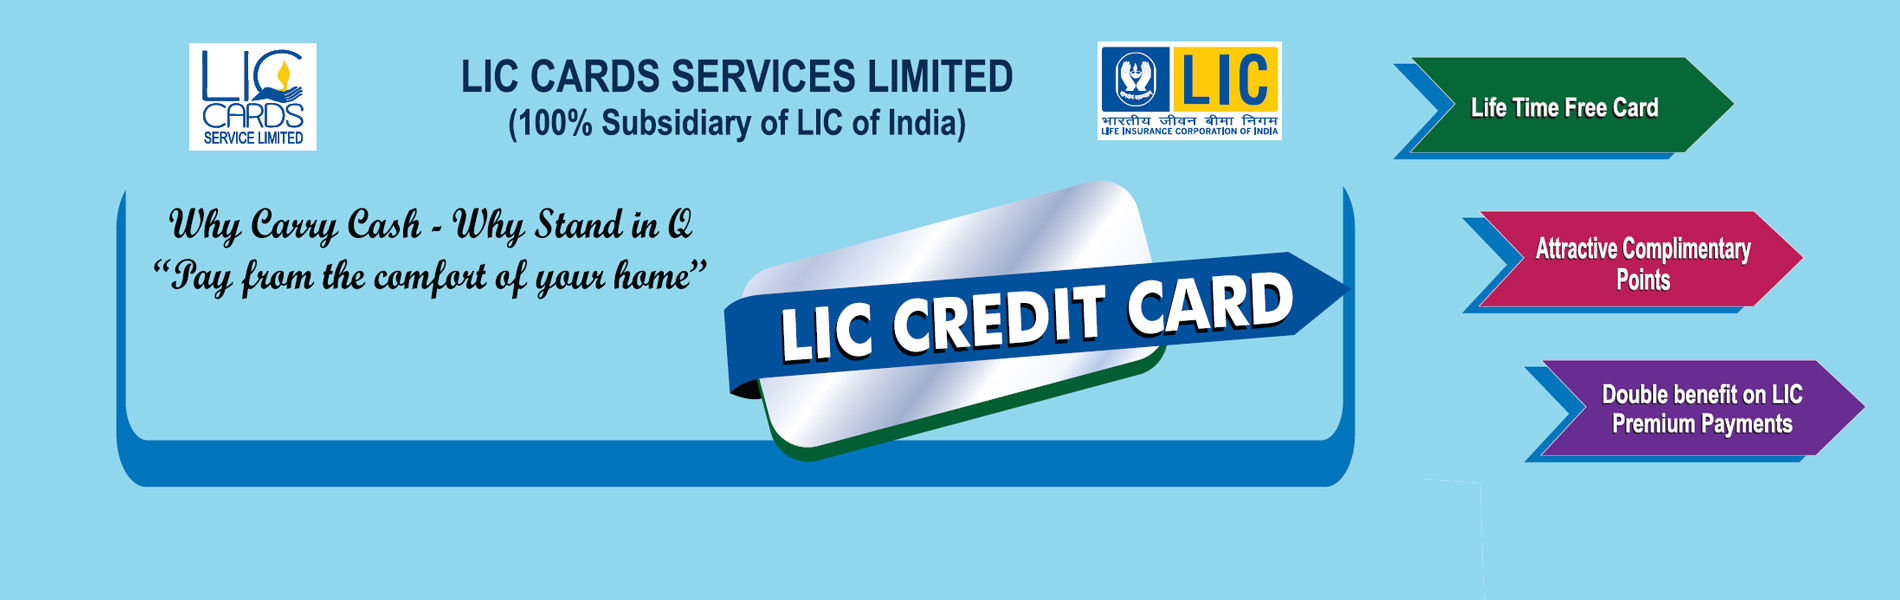 LIC Cards provides digitalised solution through Credit/Gift cards.